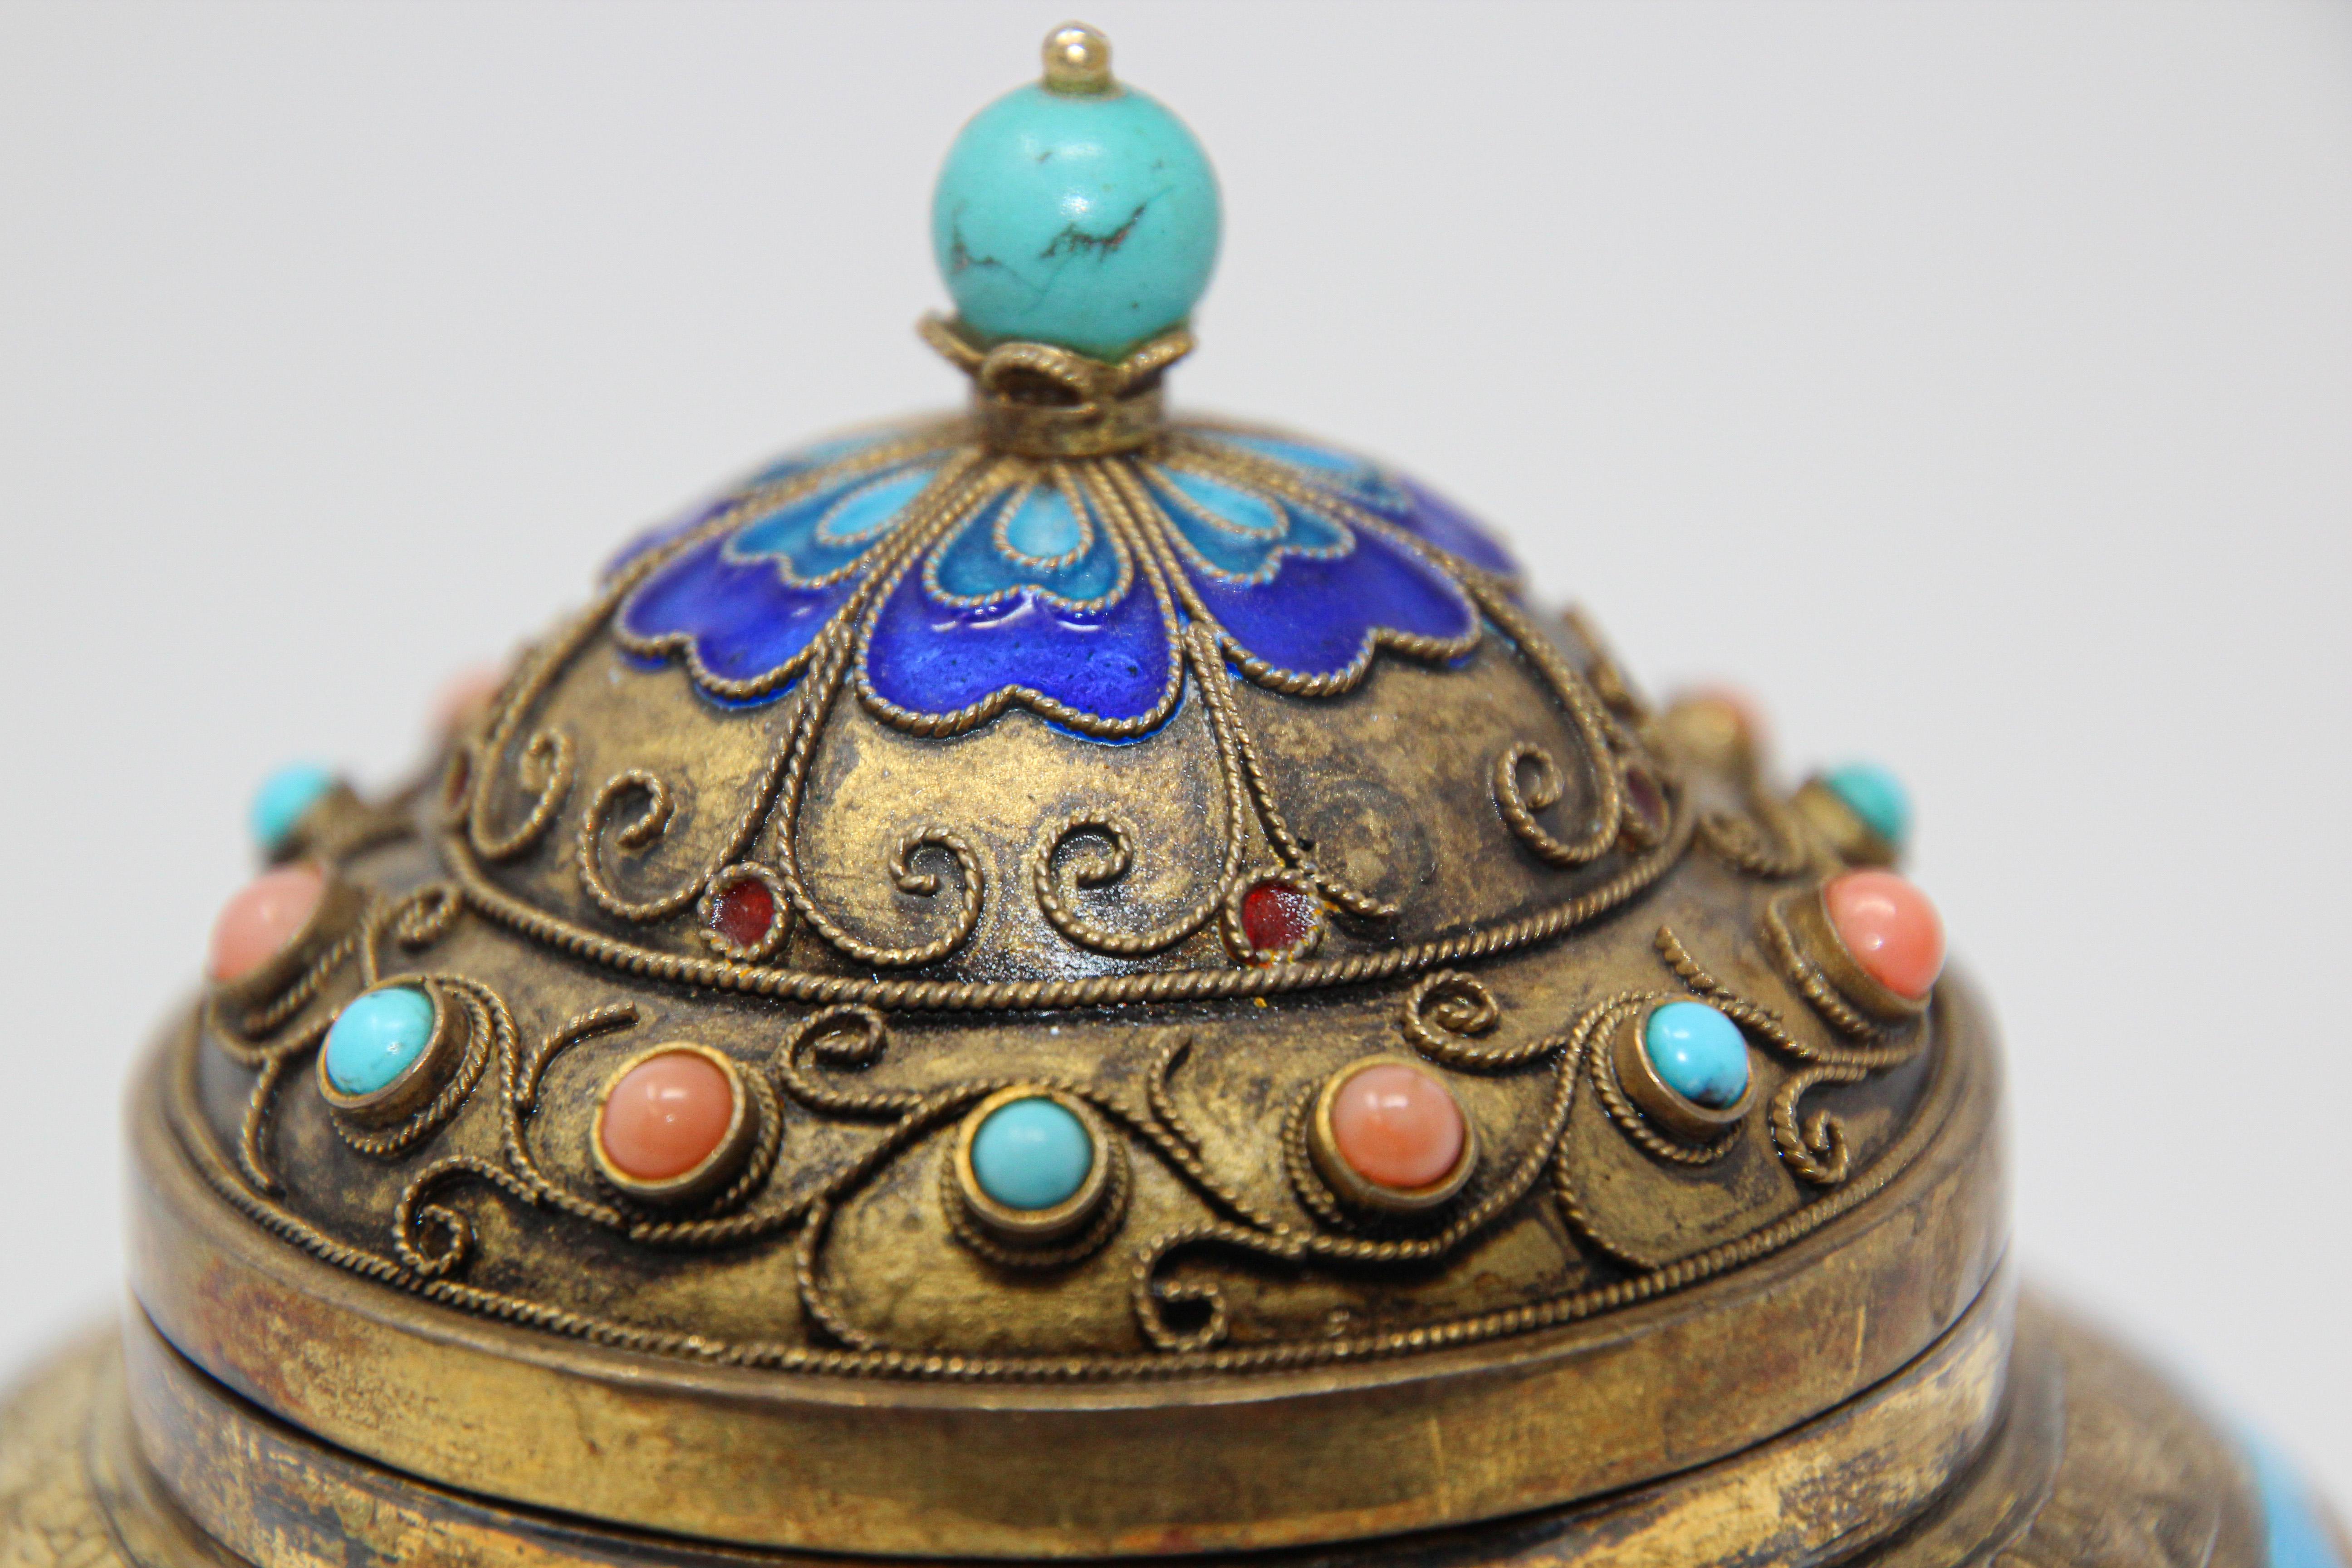 Chinese Export Brass Snuff Box with Turquoise Enamel Dragons and Beads Inlaid 5